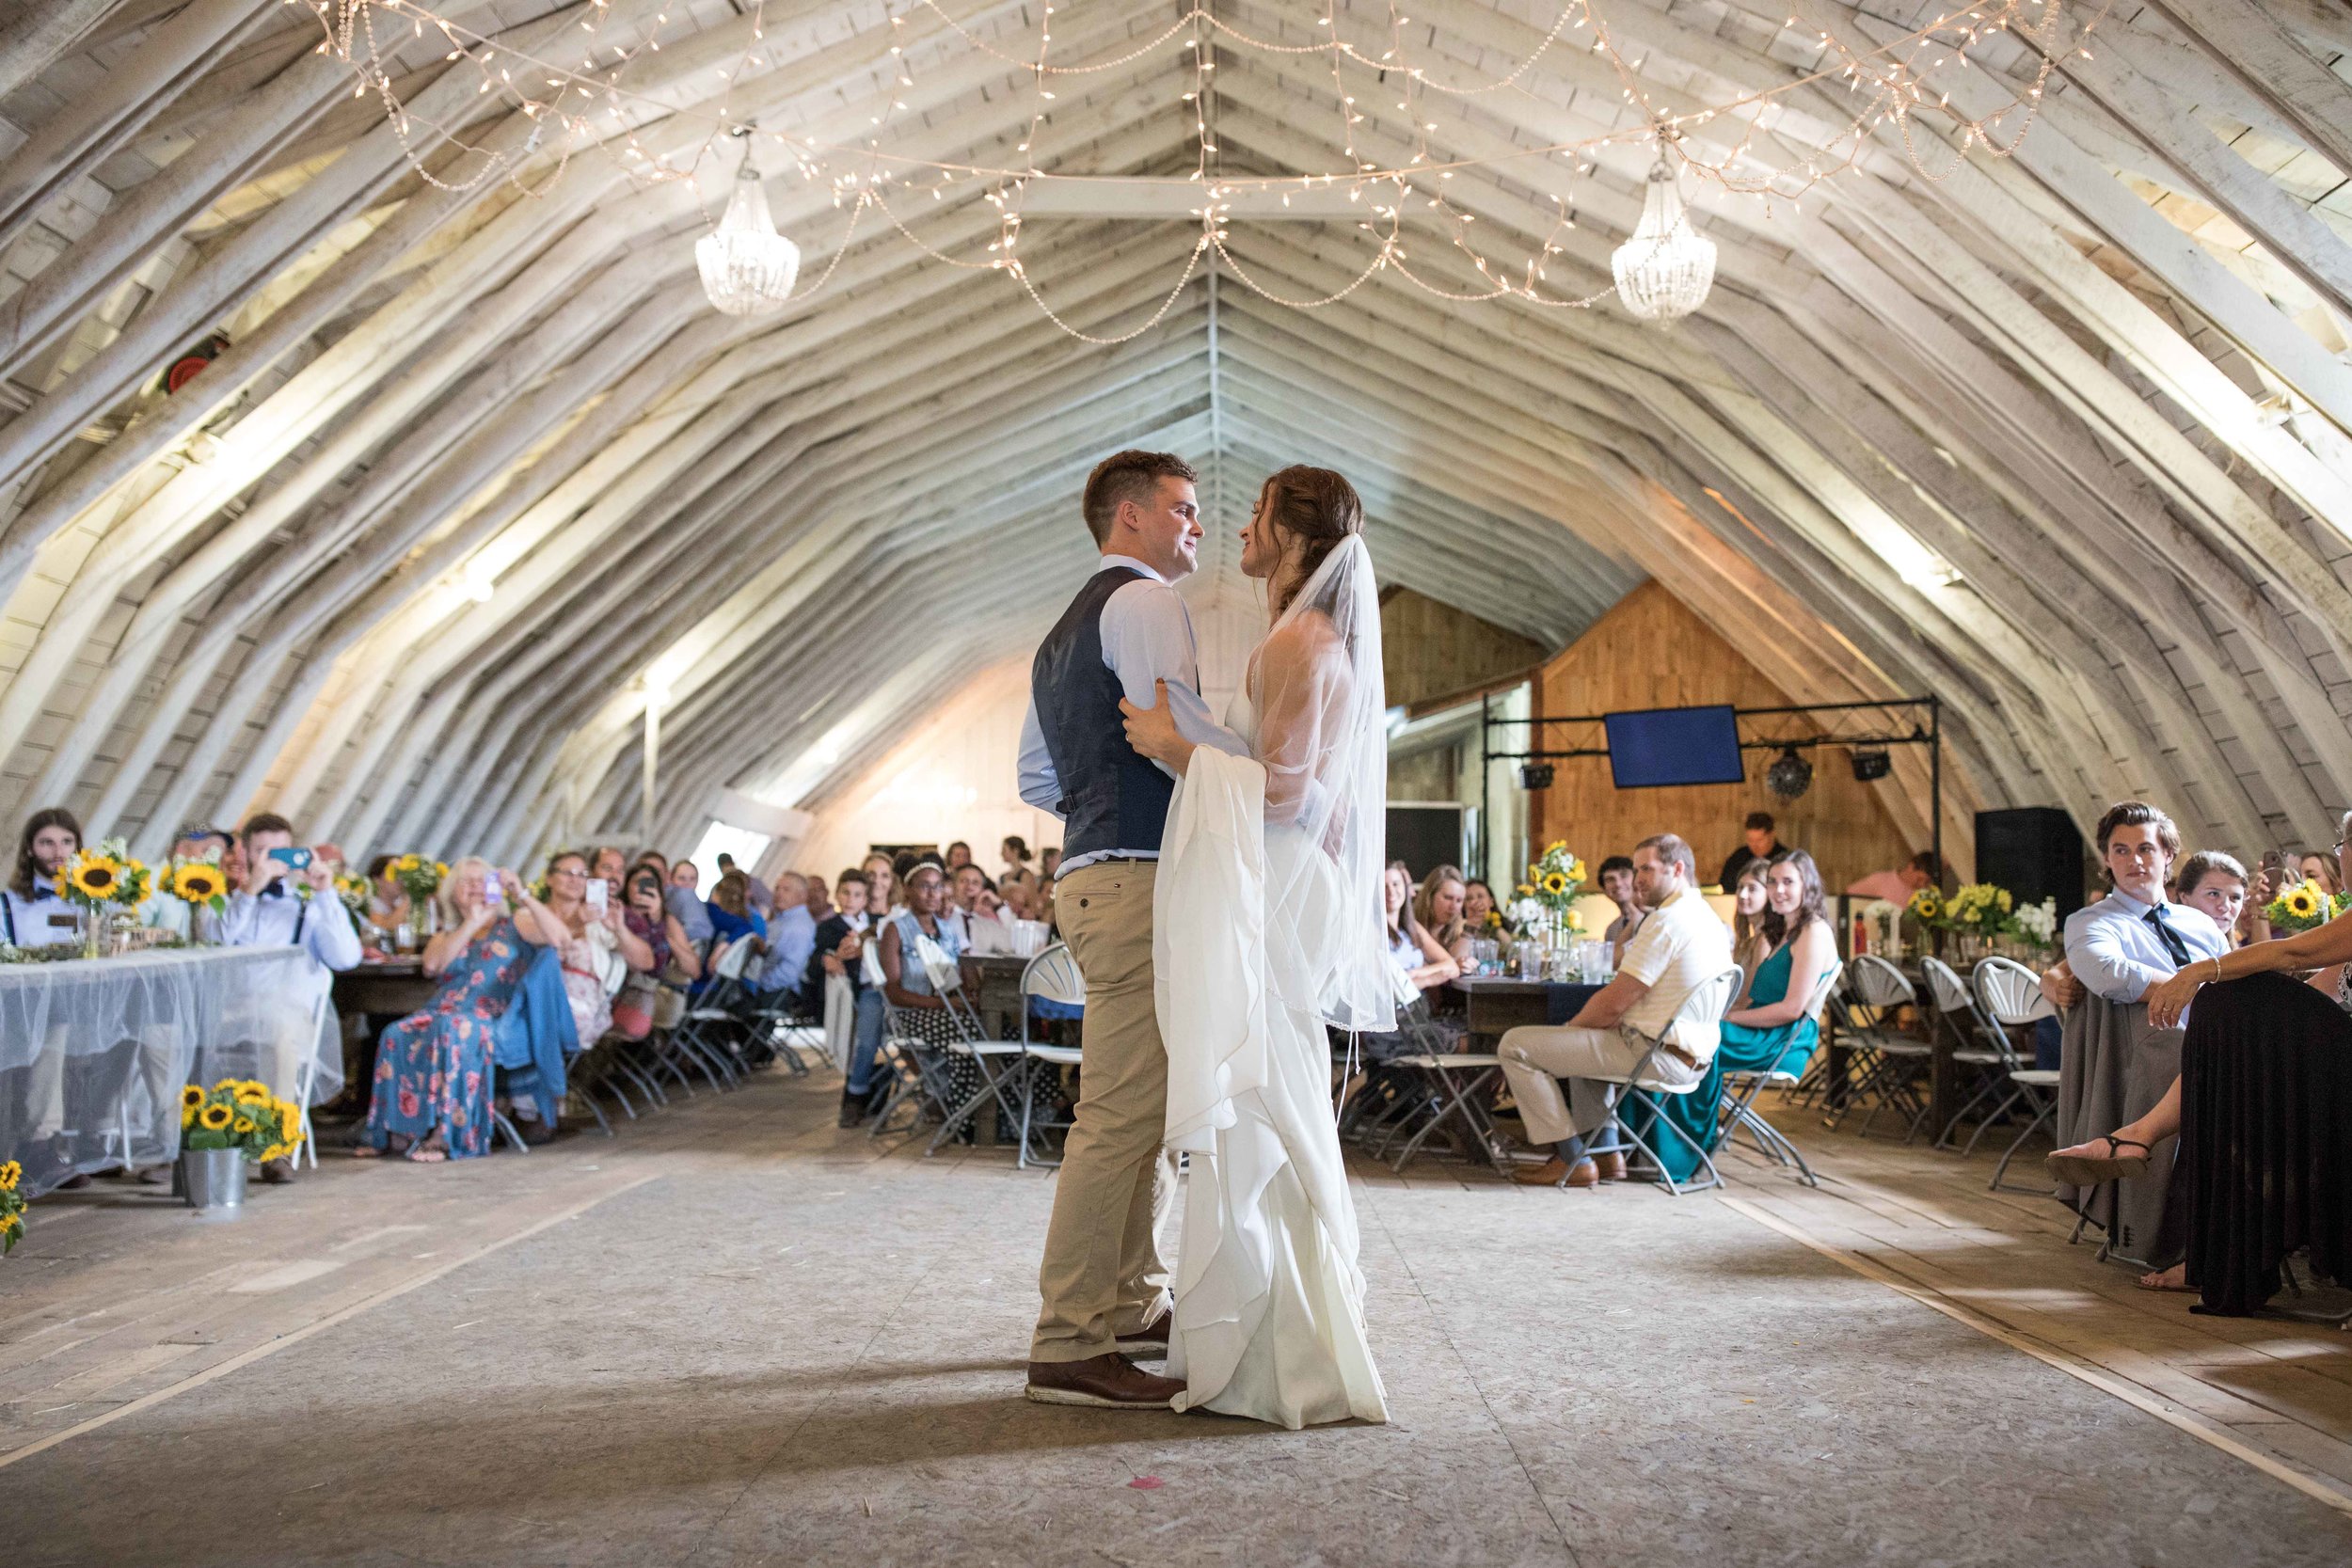  the first dance as husband and wife in the loft of a real working hay barn 